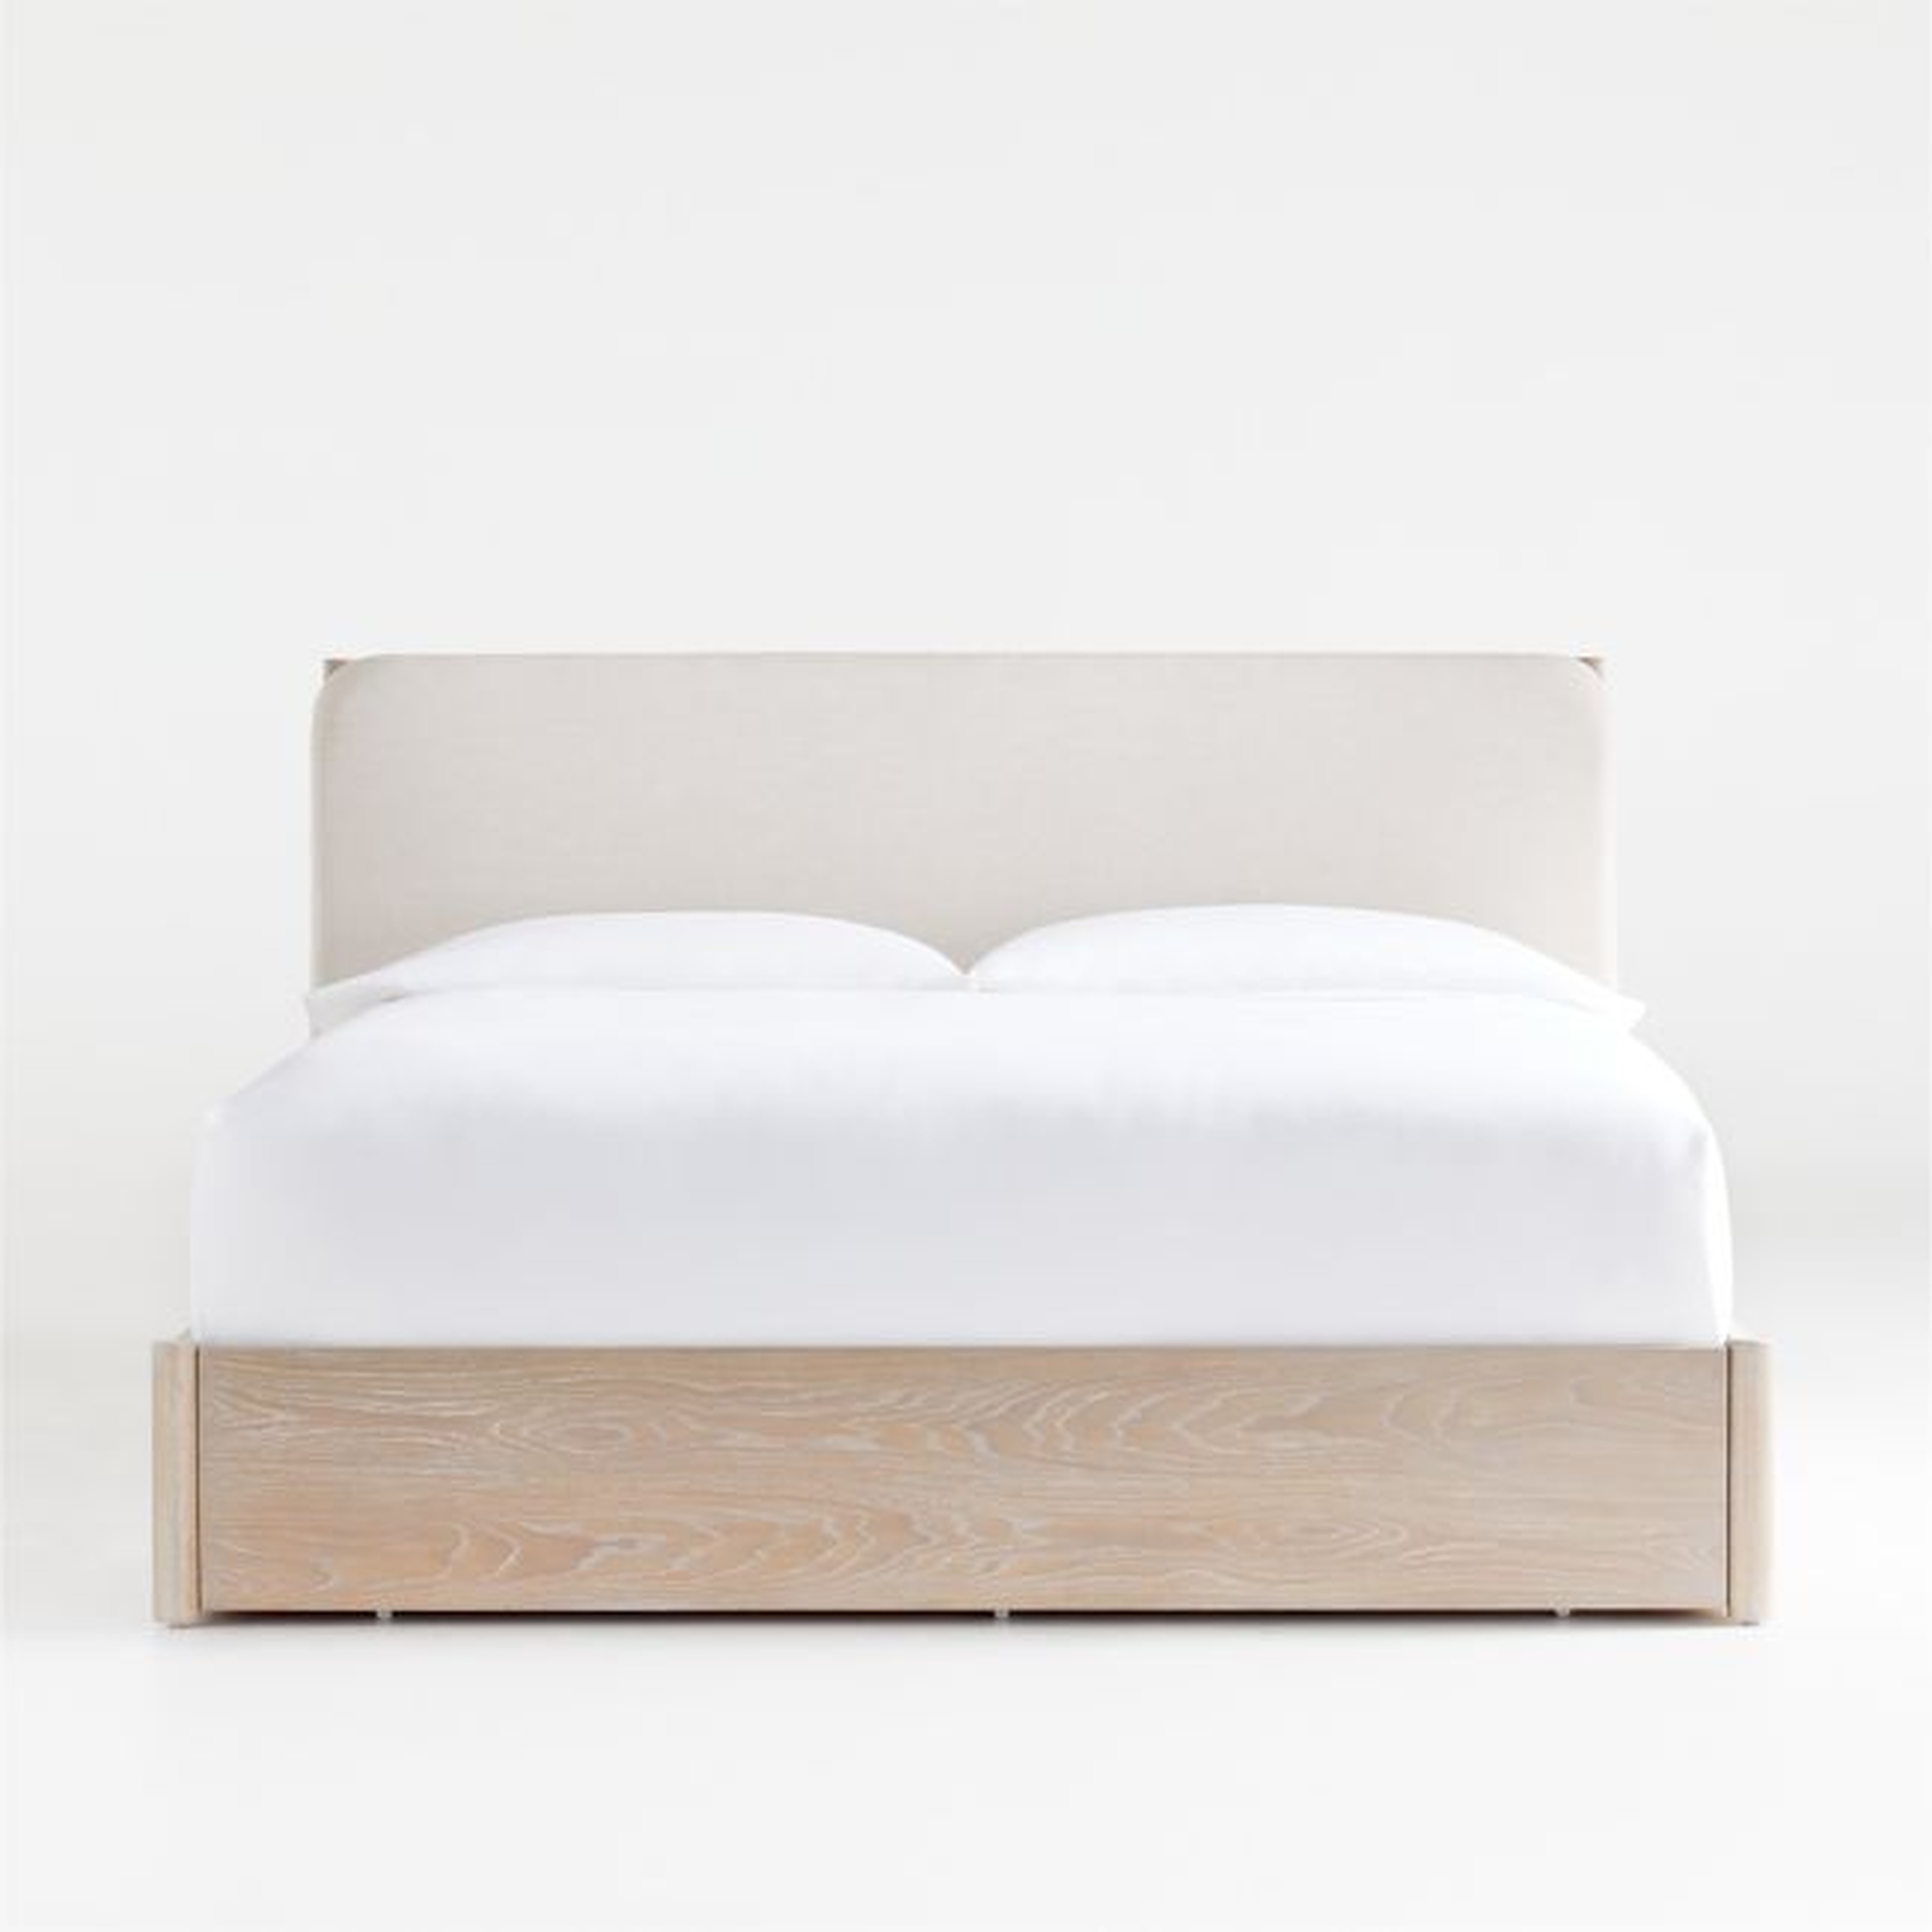 Casa White Oak Wood King Storage Bed with Outlet - Crate and Barrel